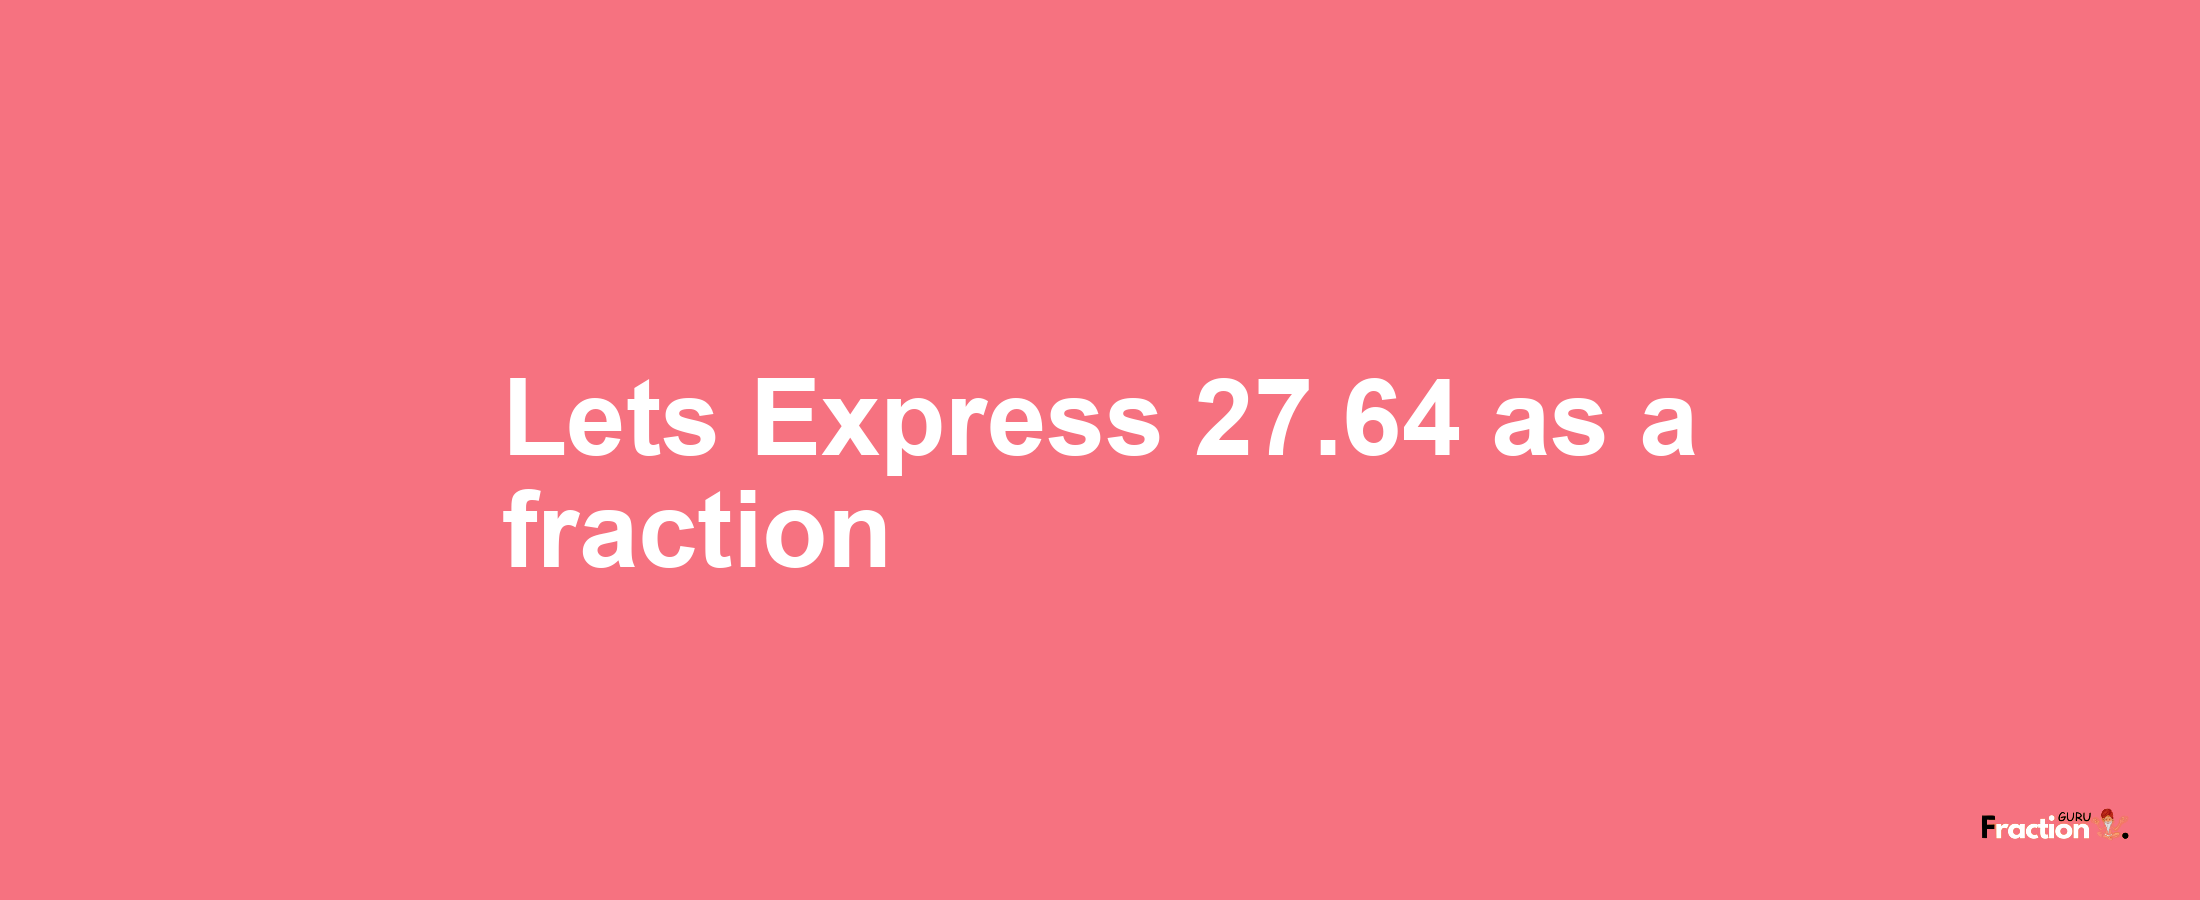 Lets Express 27.64 as afraction